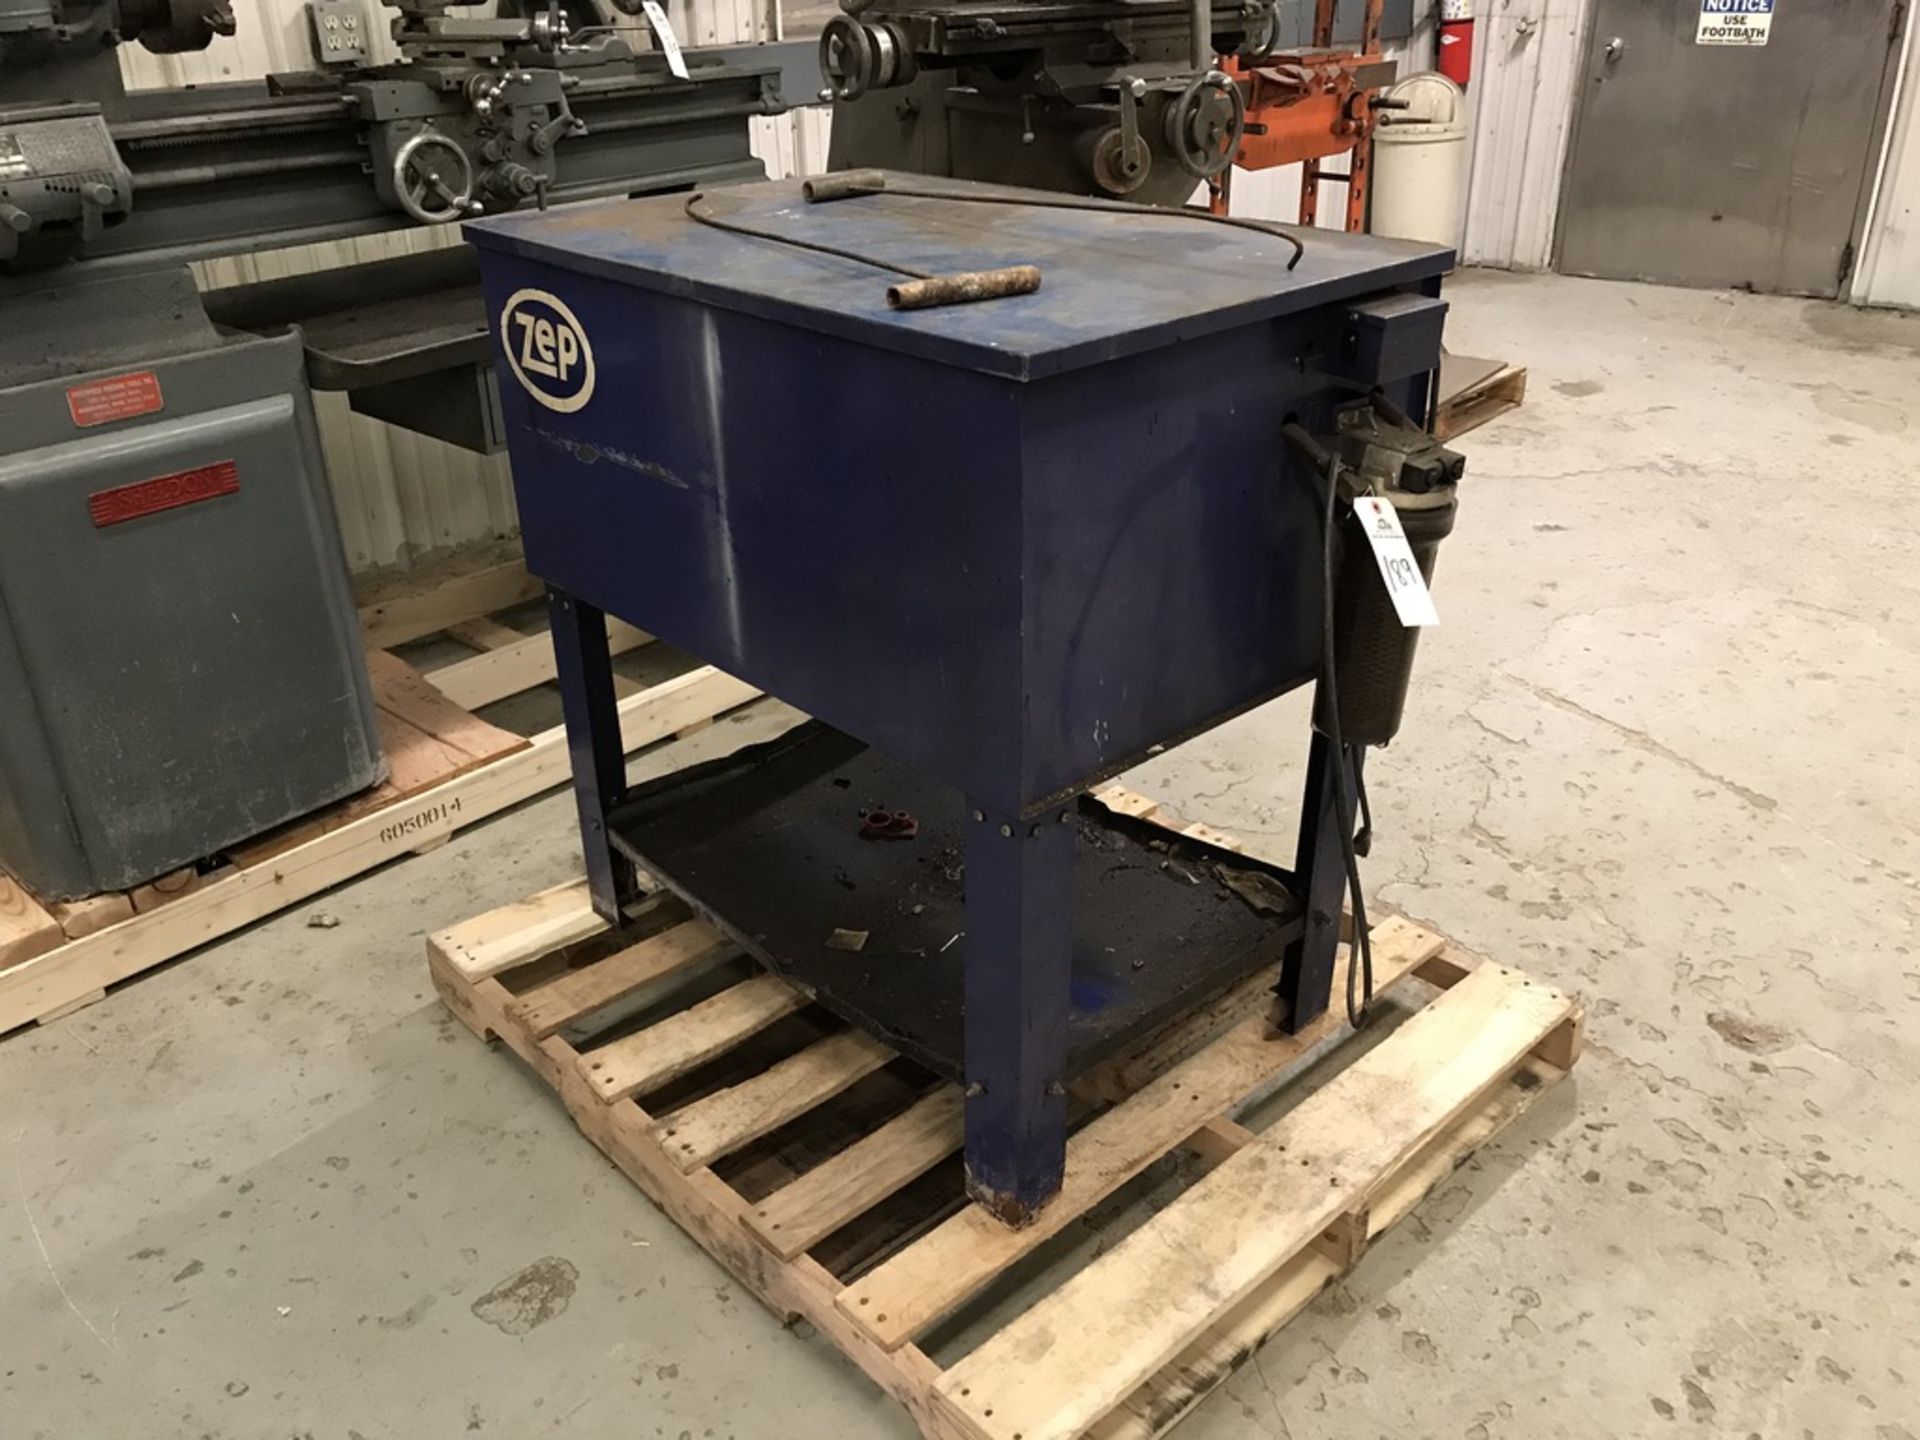 ZEP Parts Washer | Rig Fee: $50